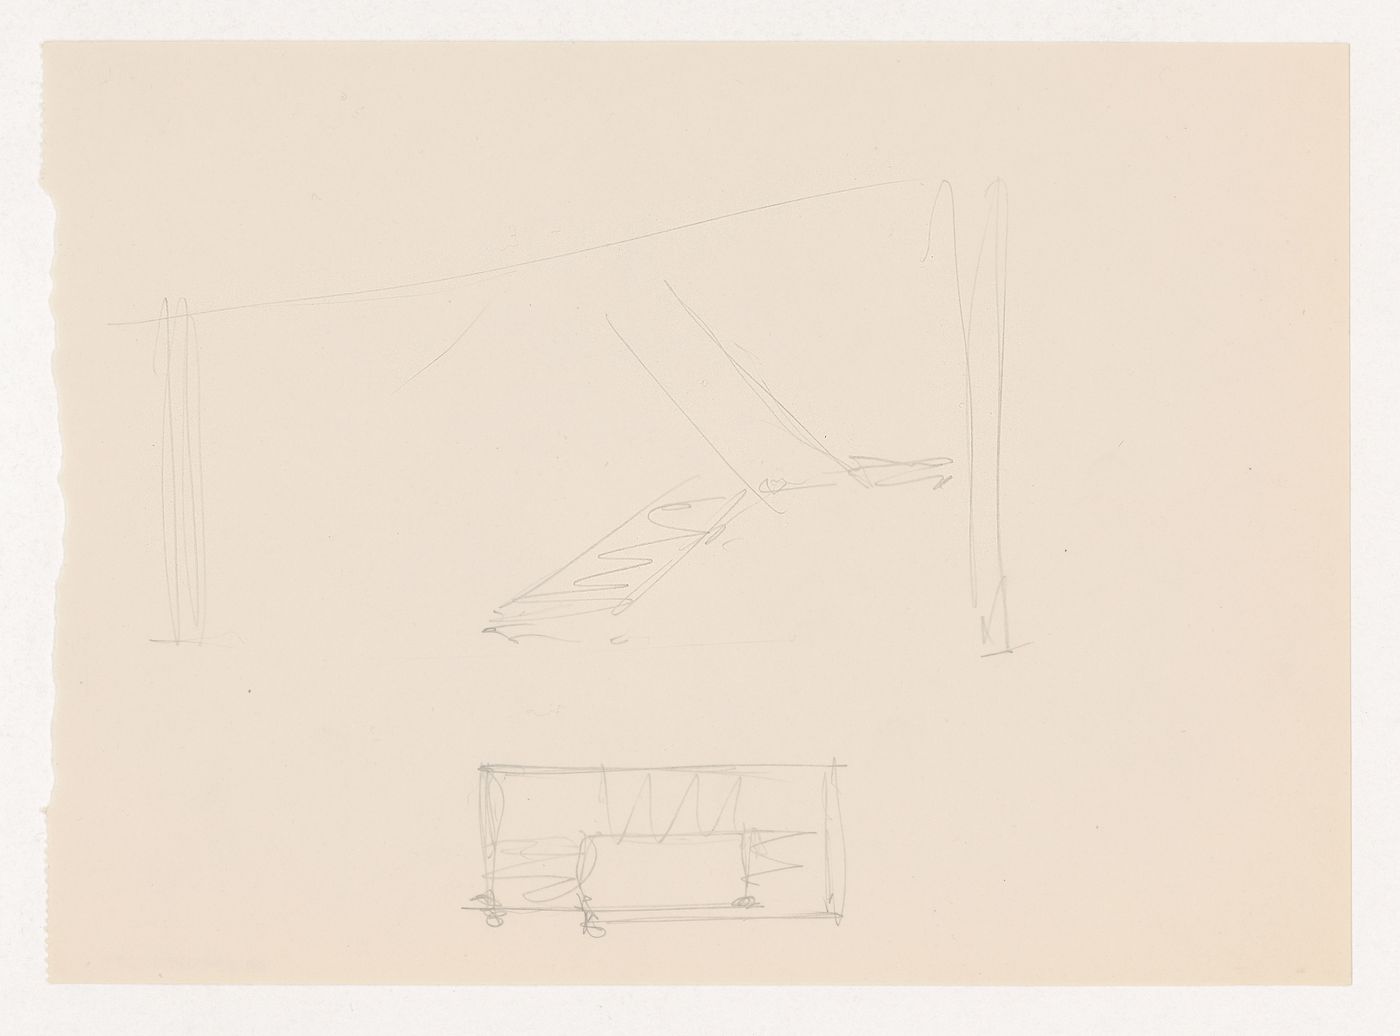 Perspective sketch and sketch plan for stairs for the Metallurgy Building, Illinois Institute of Technology, Chicago